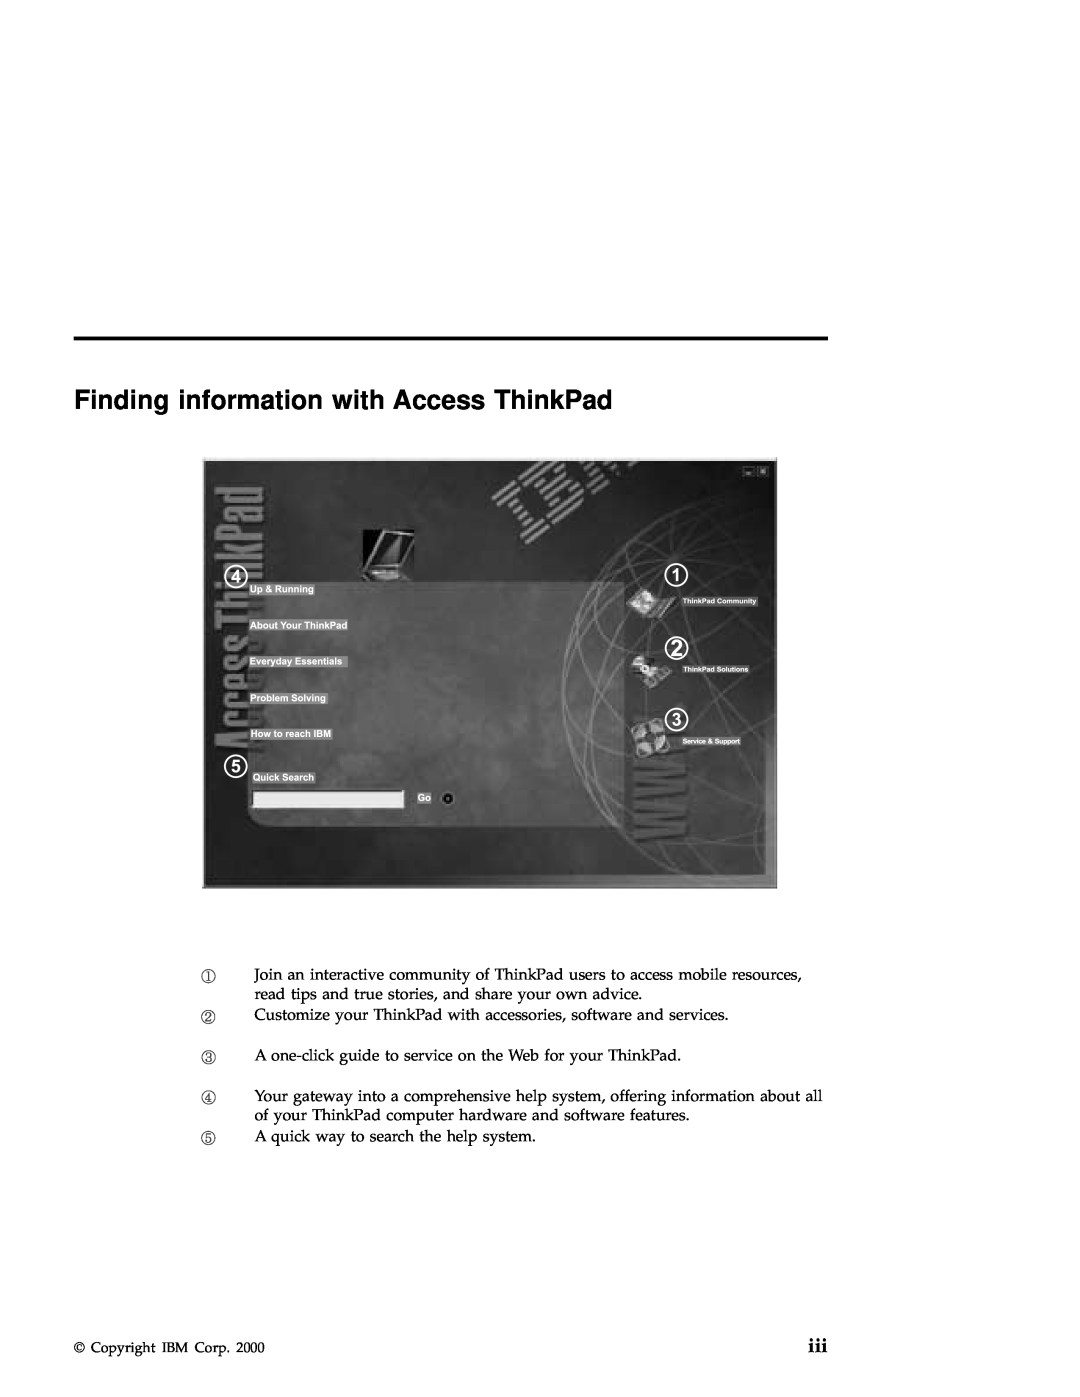 IBM A21e manual Finding information with Access ThinkPad 